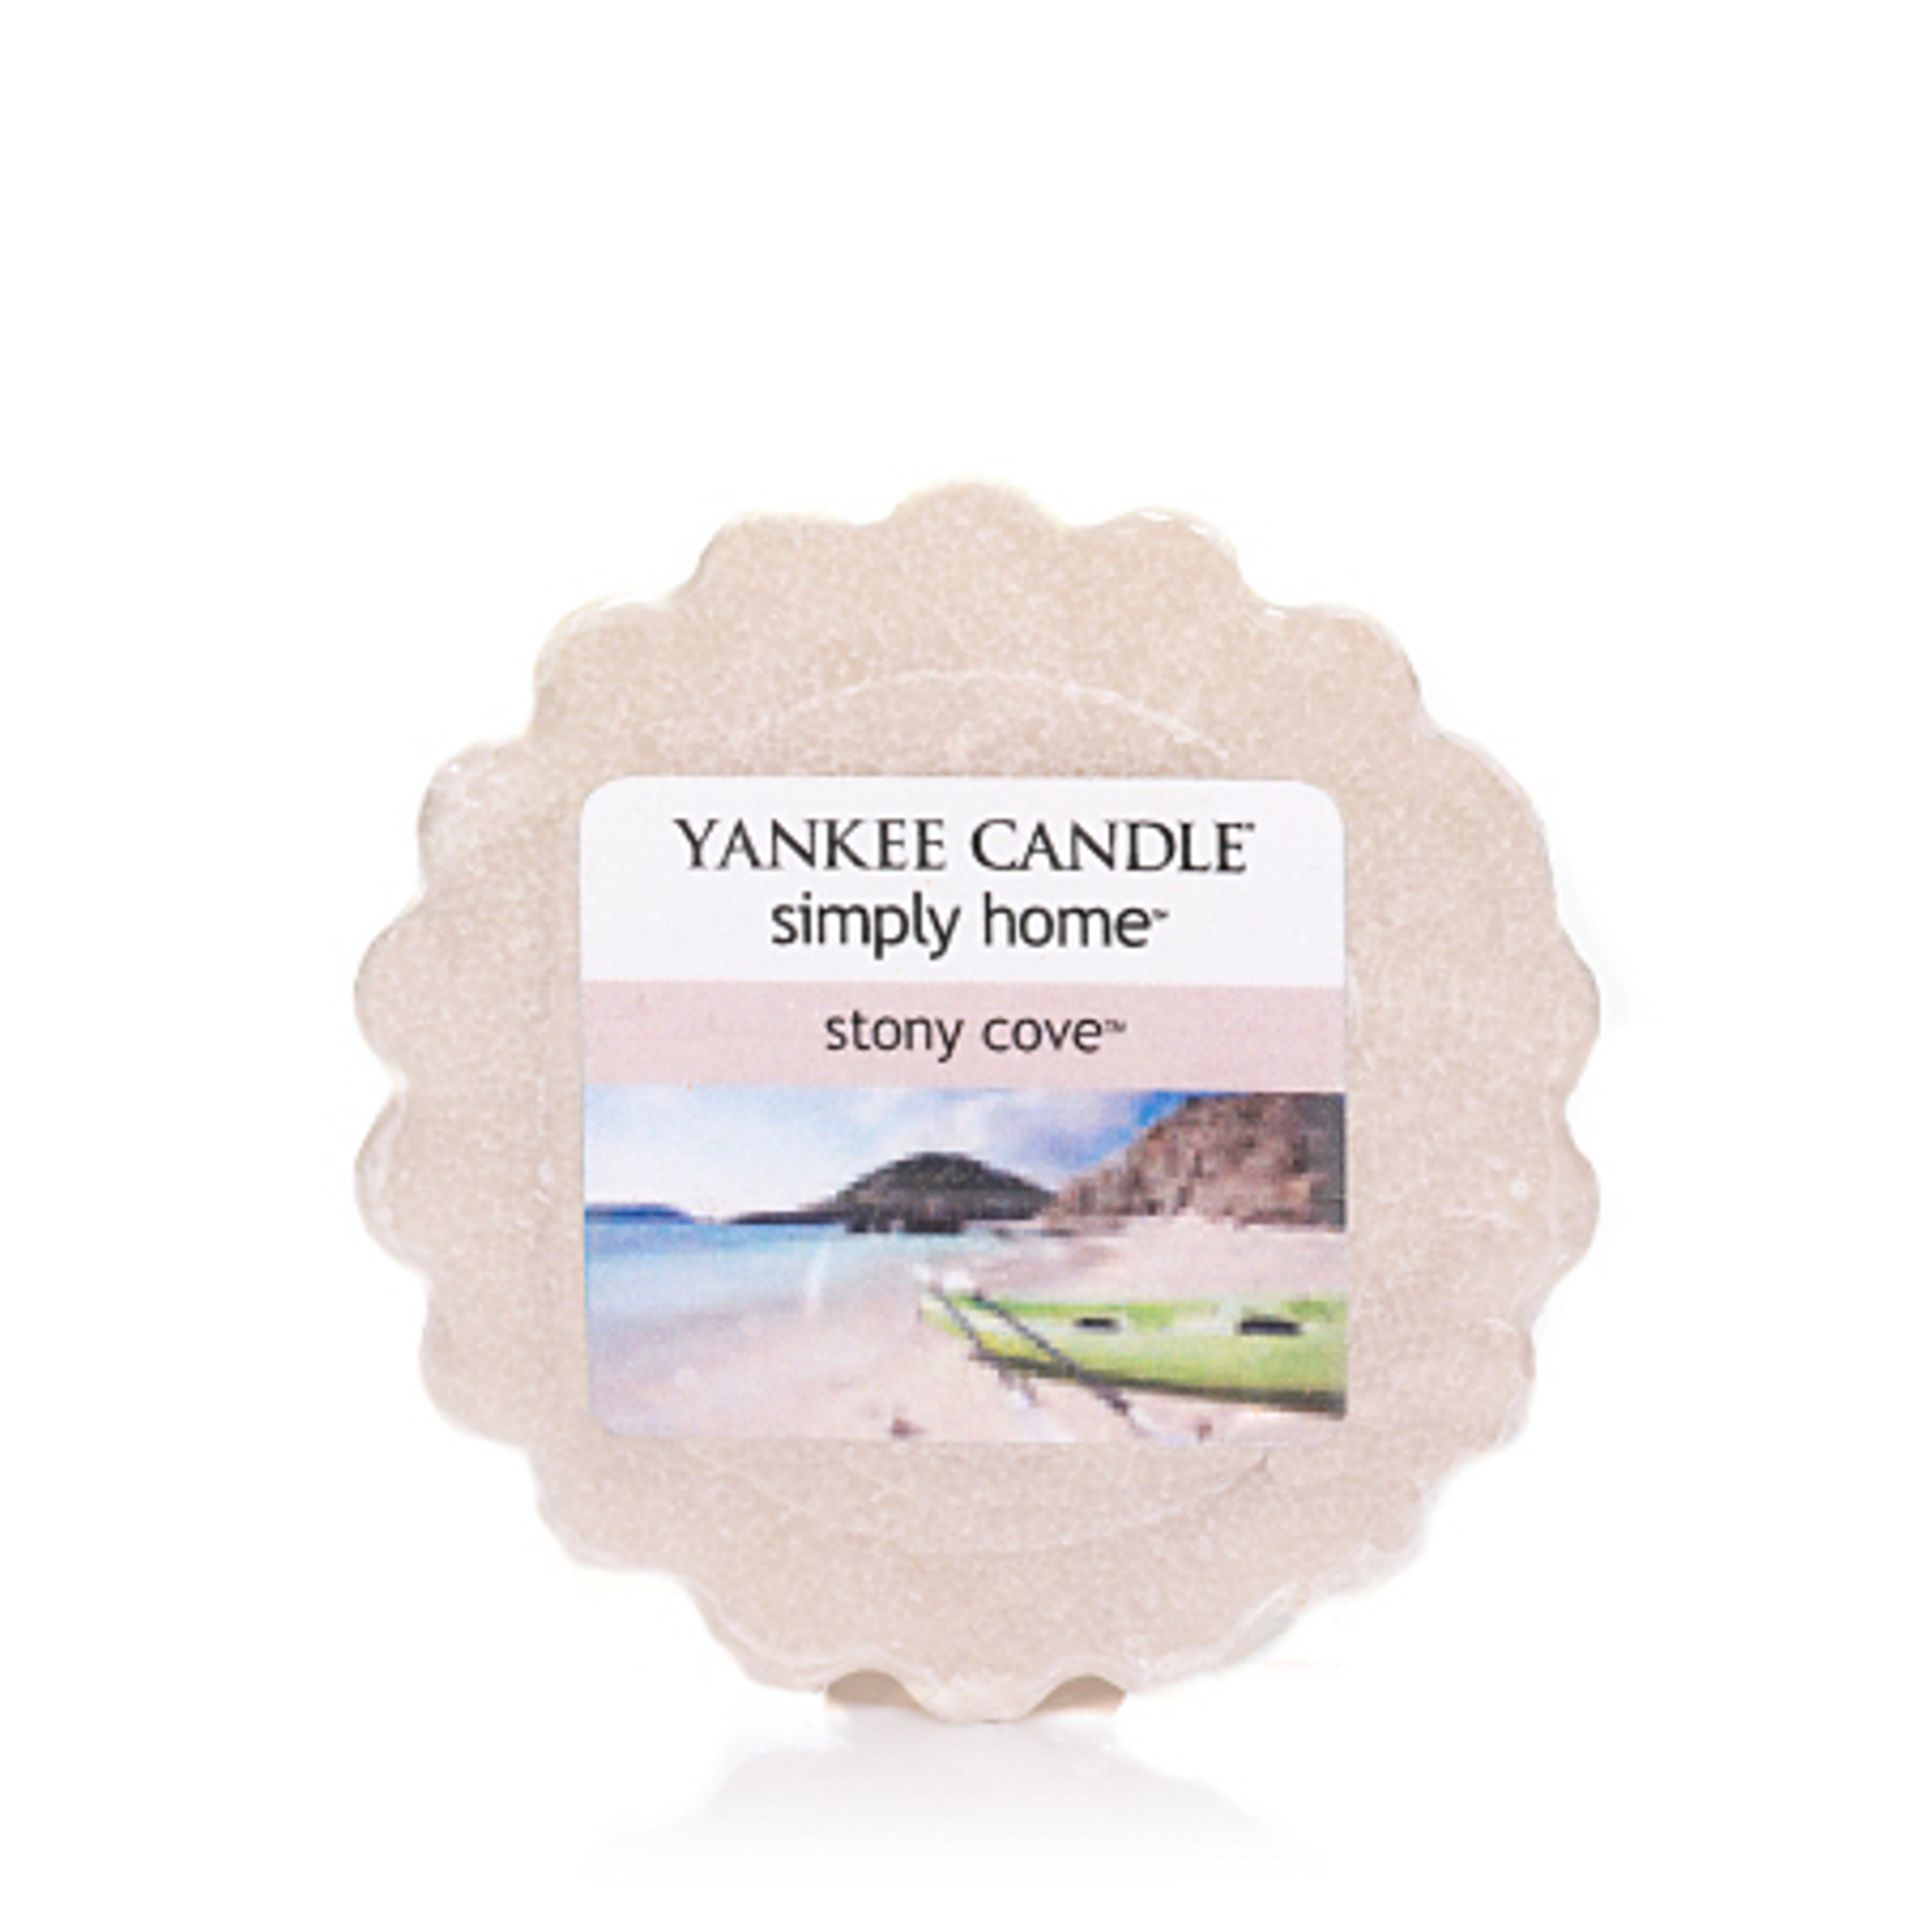 V *TRADE QTY* Brand New 24 x Yankee Candle Tarts Stony Cove RRP: £35.76 (Yankee Candles) X 10 YOUR - Image 2 of 2